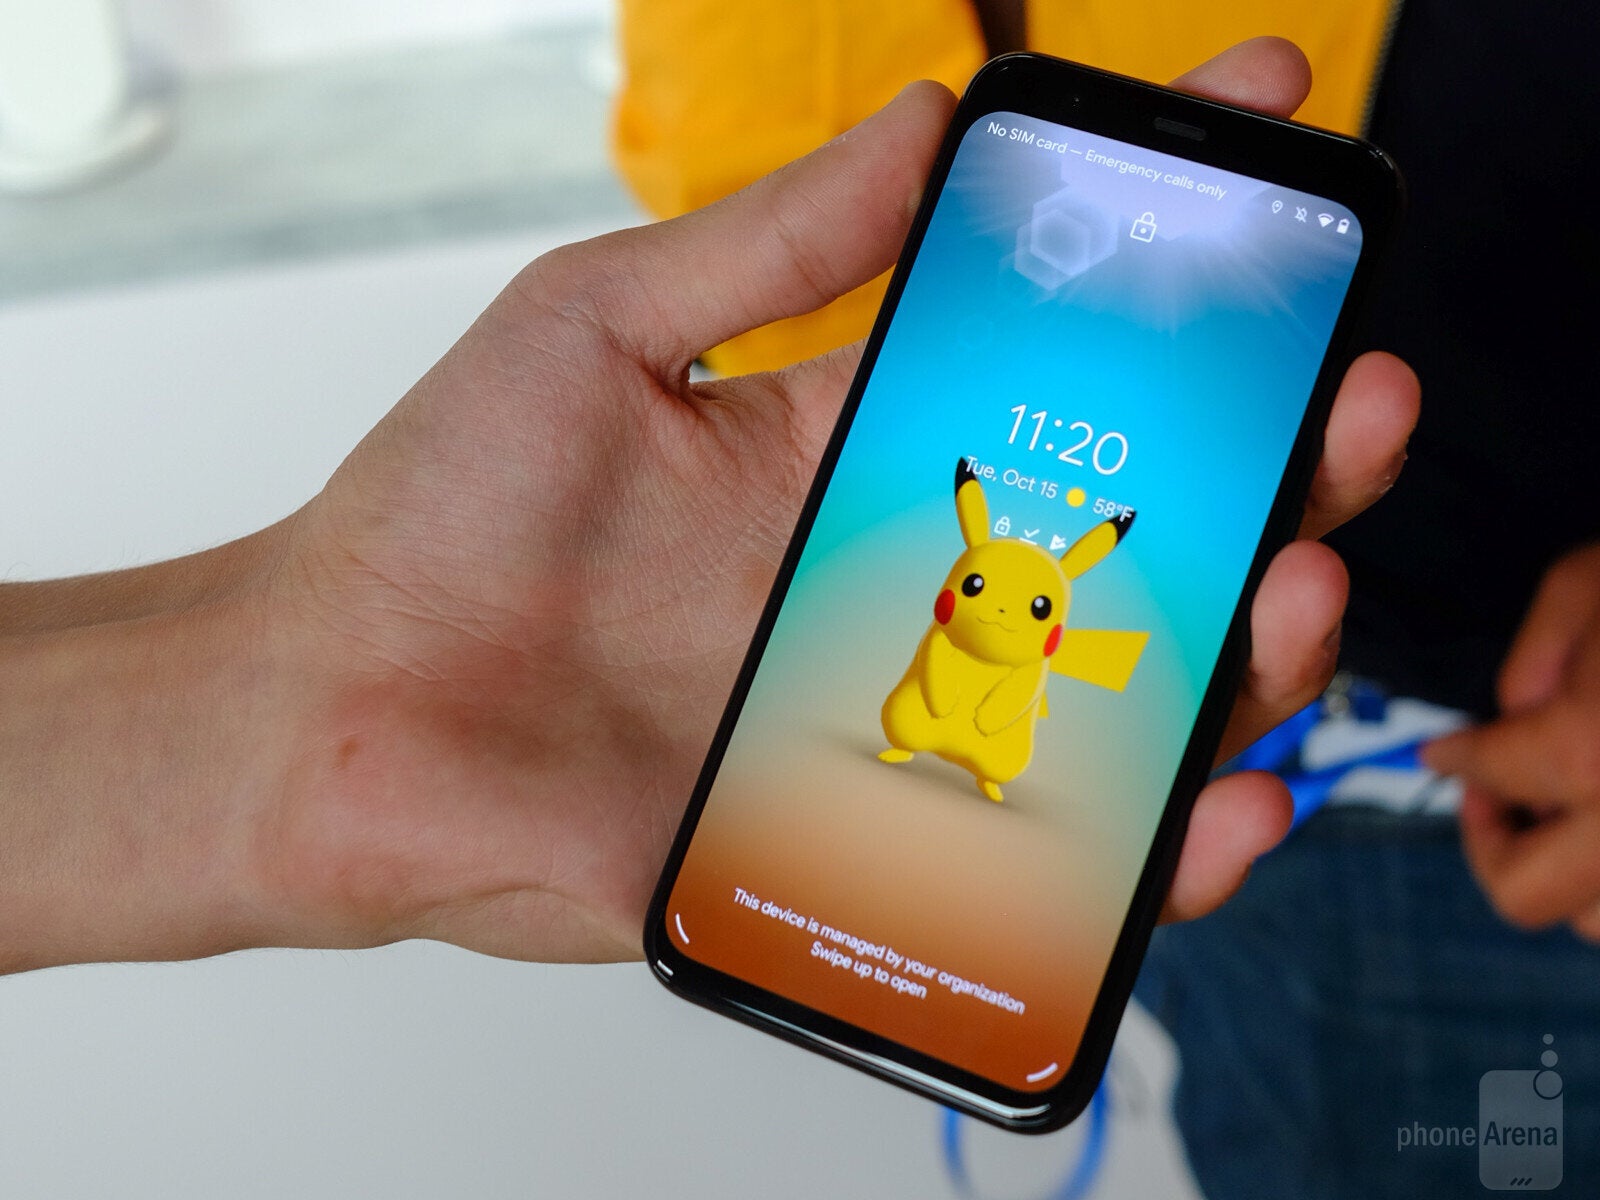 If you wave at Pikachu on the Pixel 4, he'll wave back! - Google Pixel 4 & Pixel 4 XL hands-on